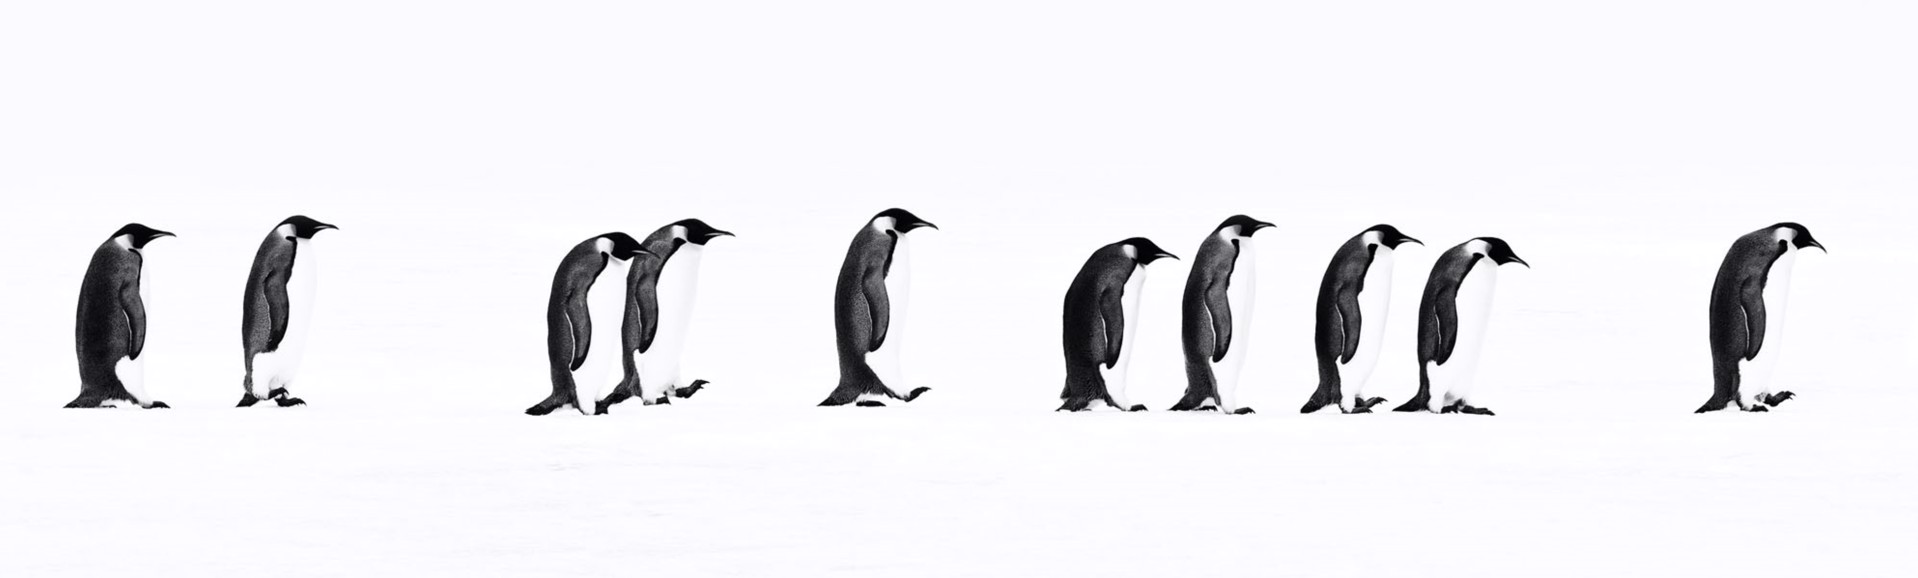 The Long March by David Yarrow